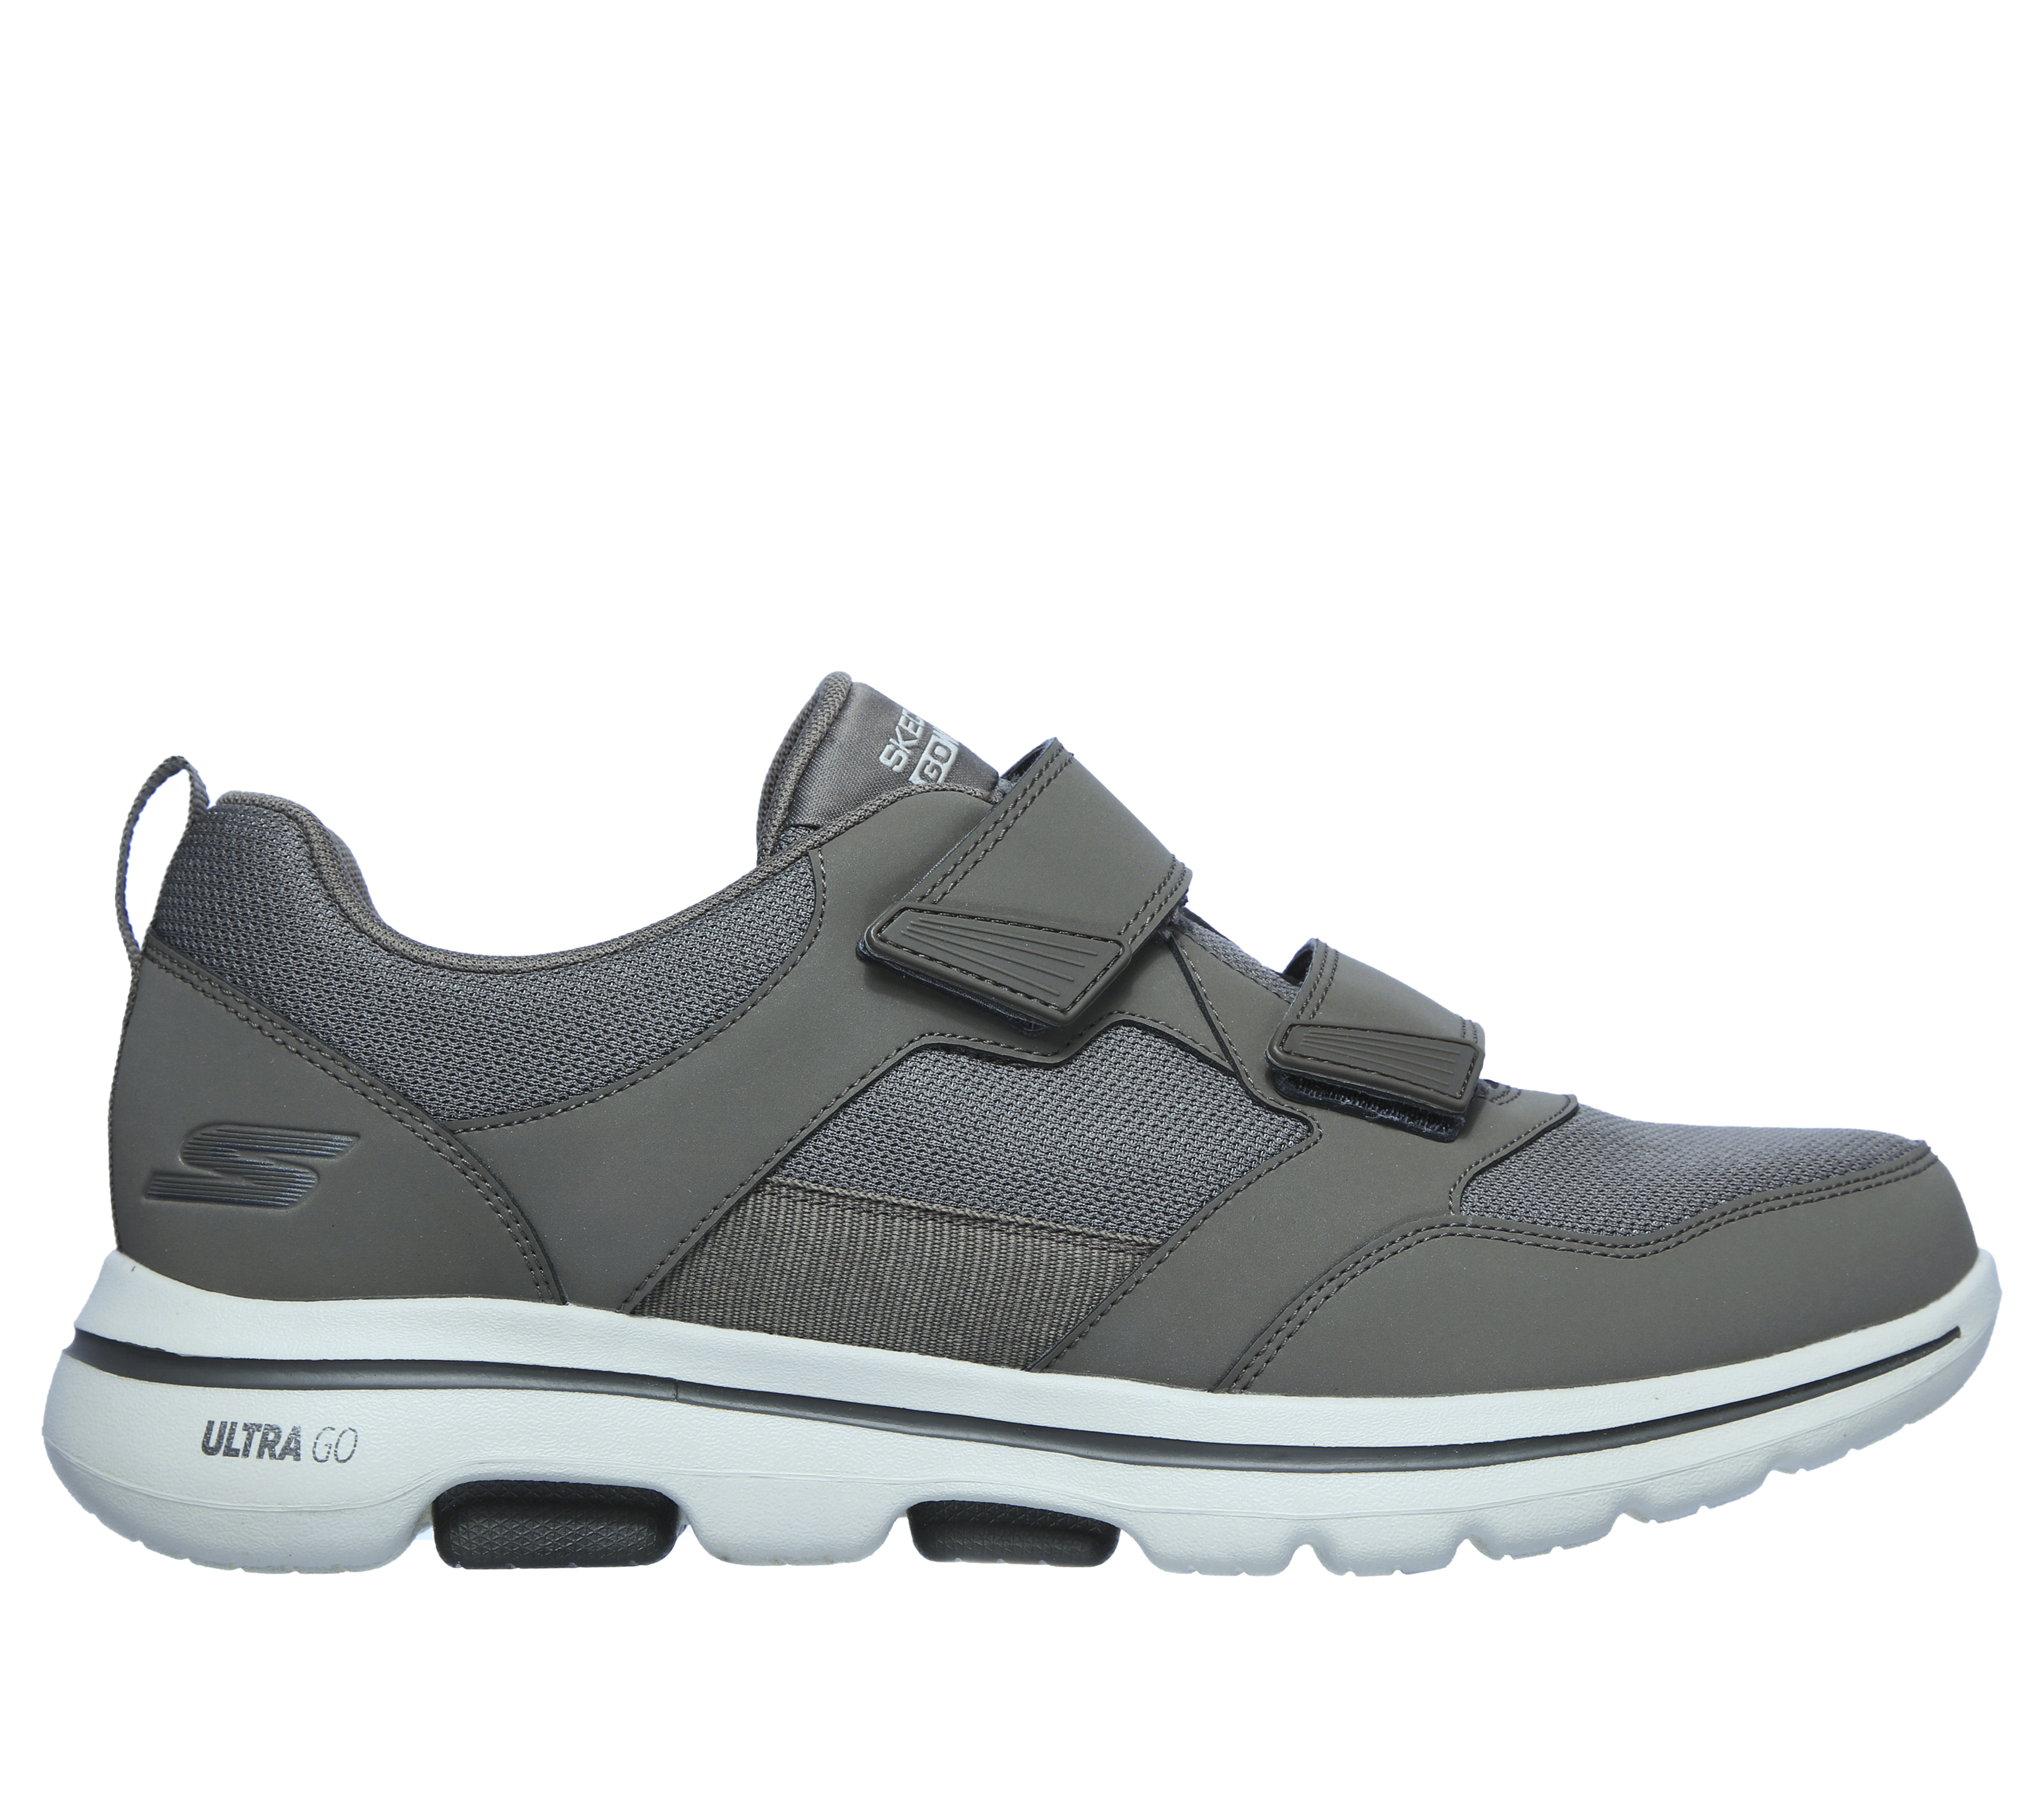 SKECHERS - SKECHERS GOWALK 5 – TRENDY The leaders in walking shoe  technology continue to innovate with the Skechers GOwalk 5™ - Trendy.  Features lightweight, responsive ULTRA GO™ cushioning and high-rebound  COMFORT